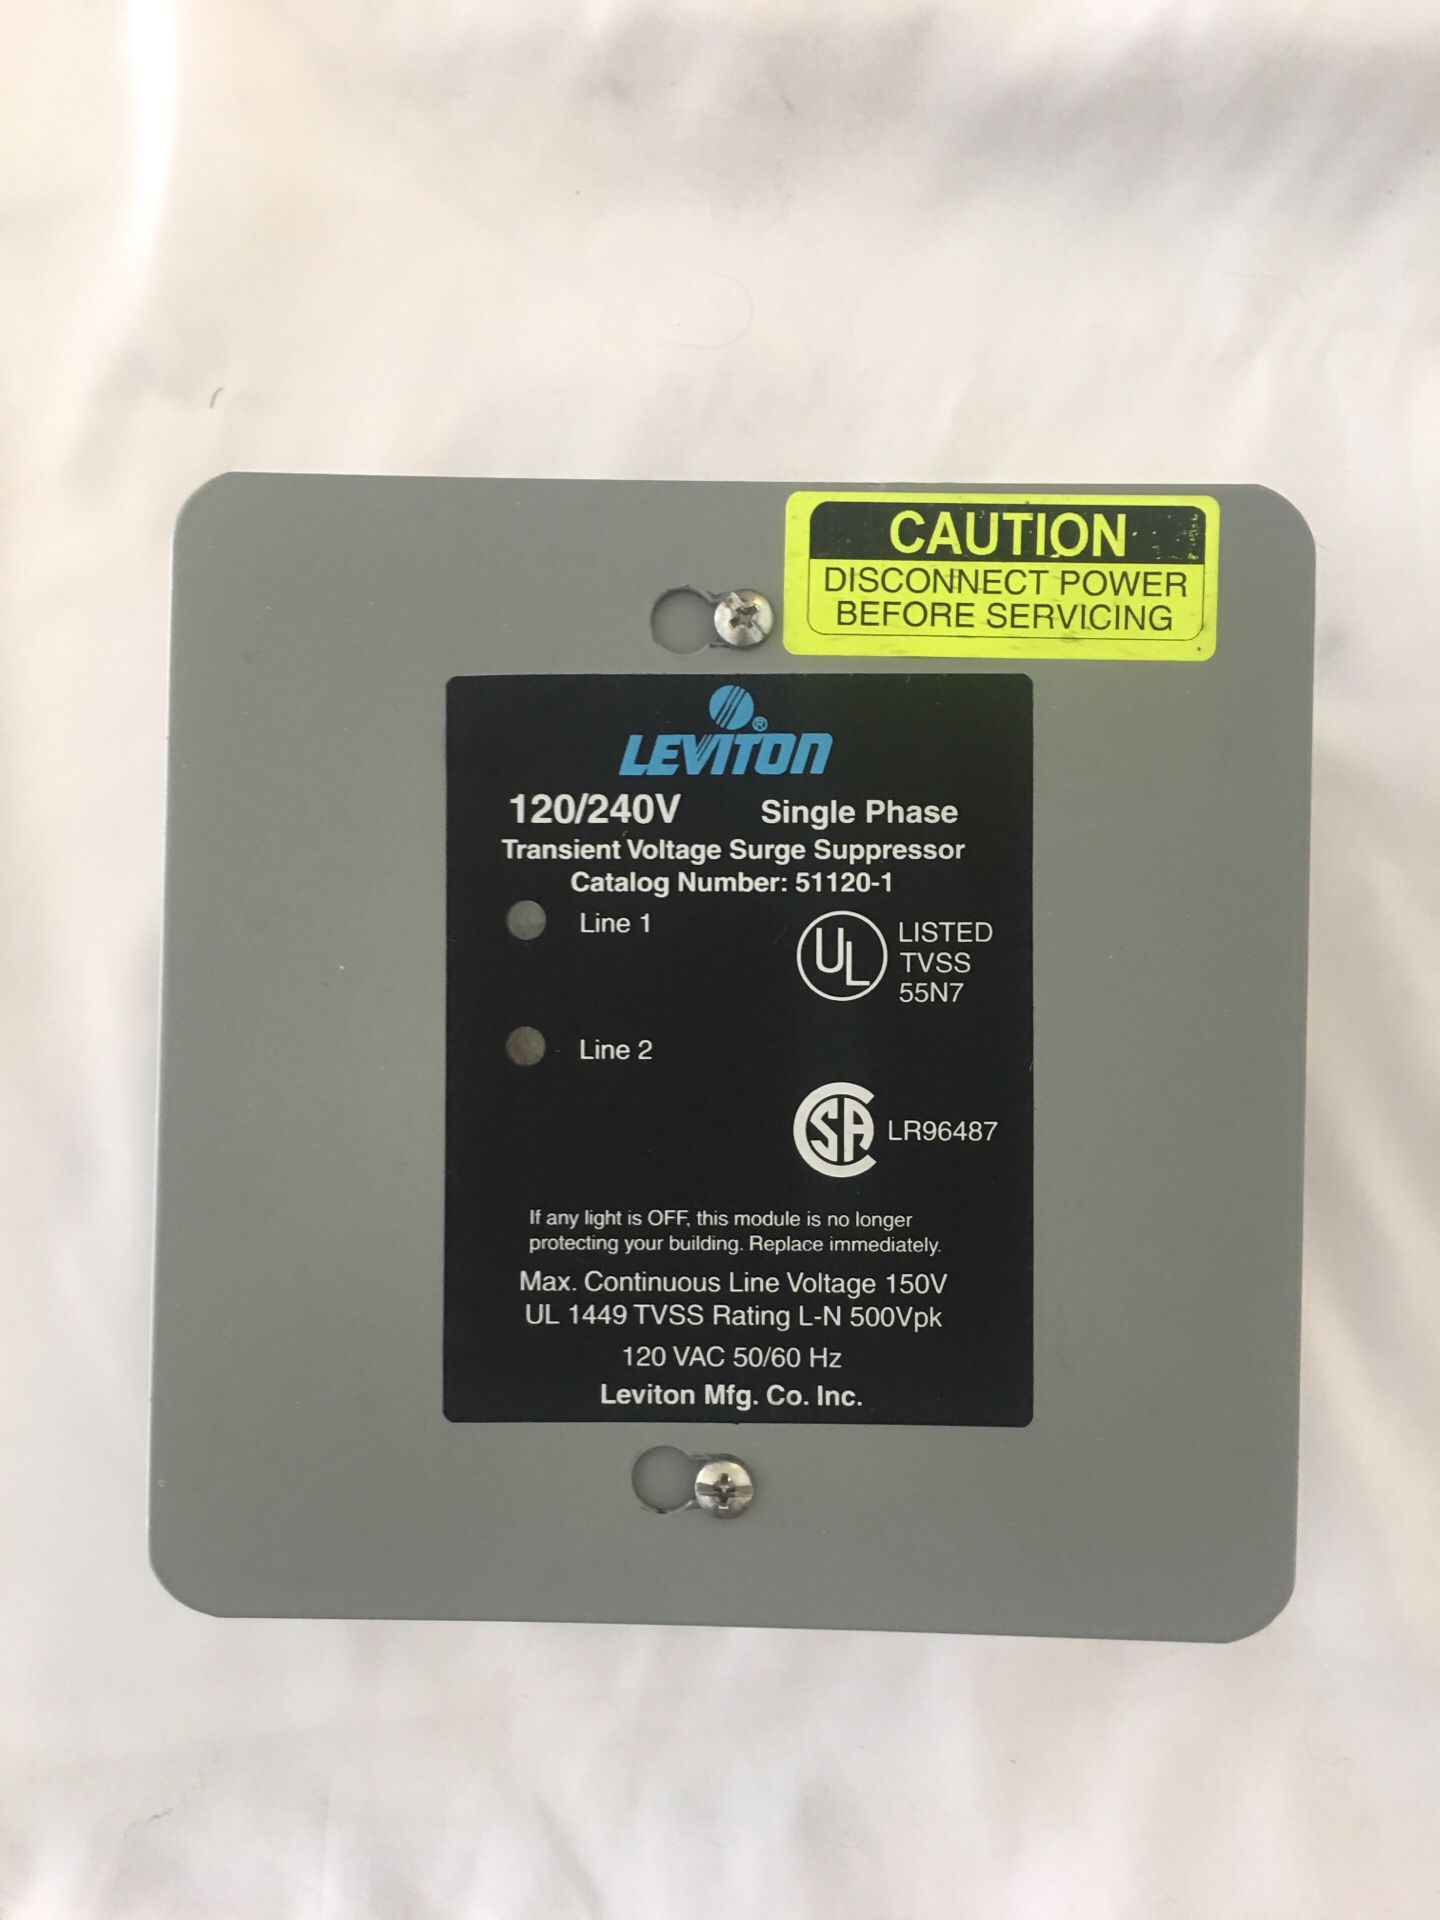 Leviton Single Phase Surge Suppressor for Sale in Chandler, AZ OfferUp